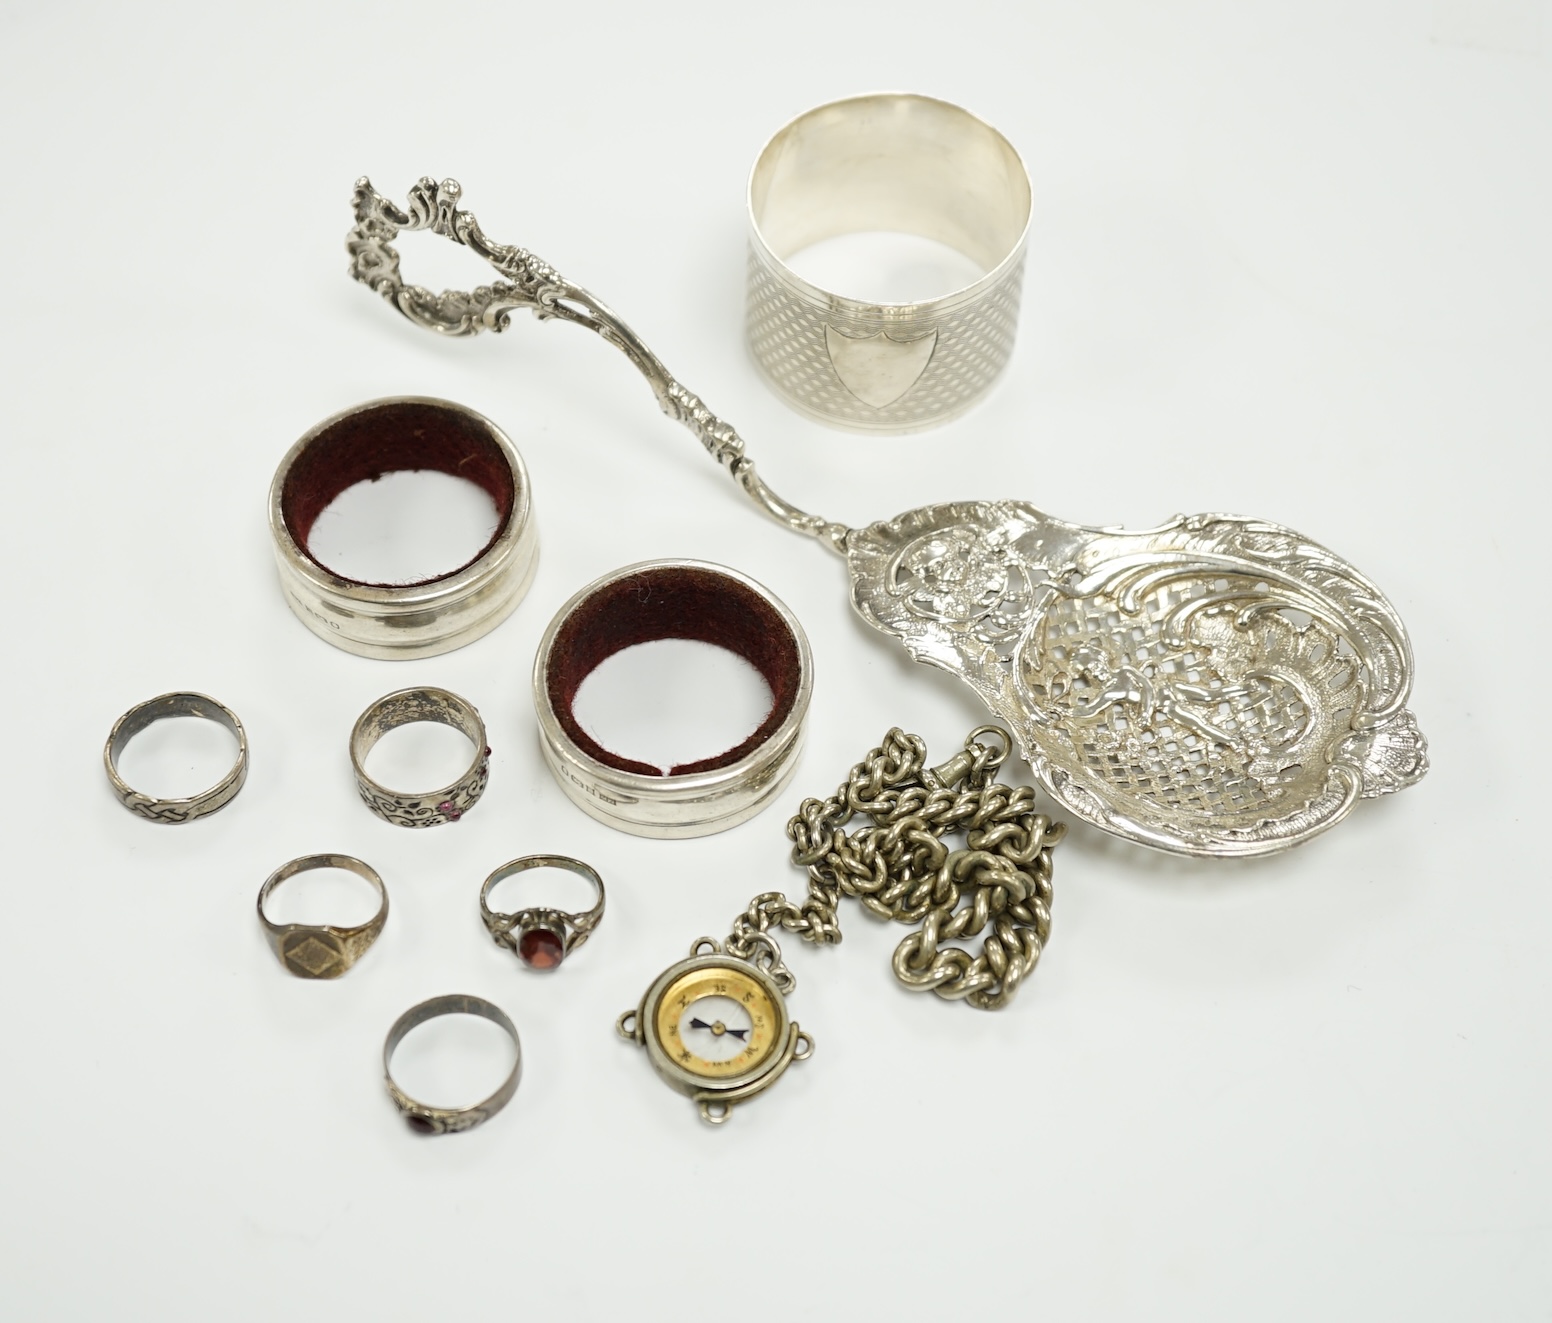 Sundry small silver and white metal items including, napkin ring, continental pierced spoon, etc.